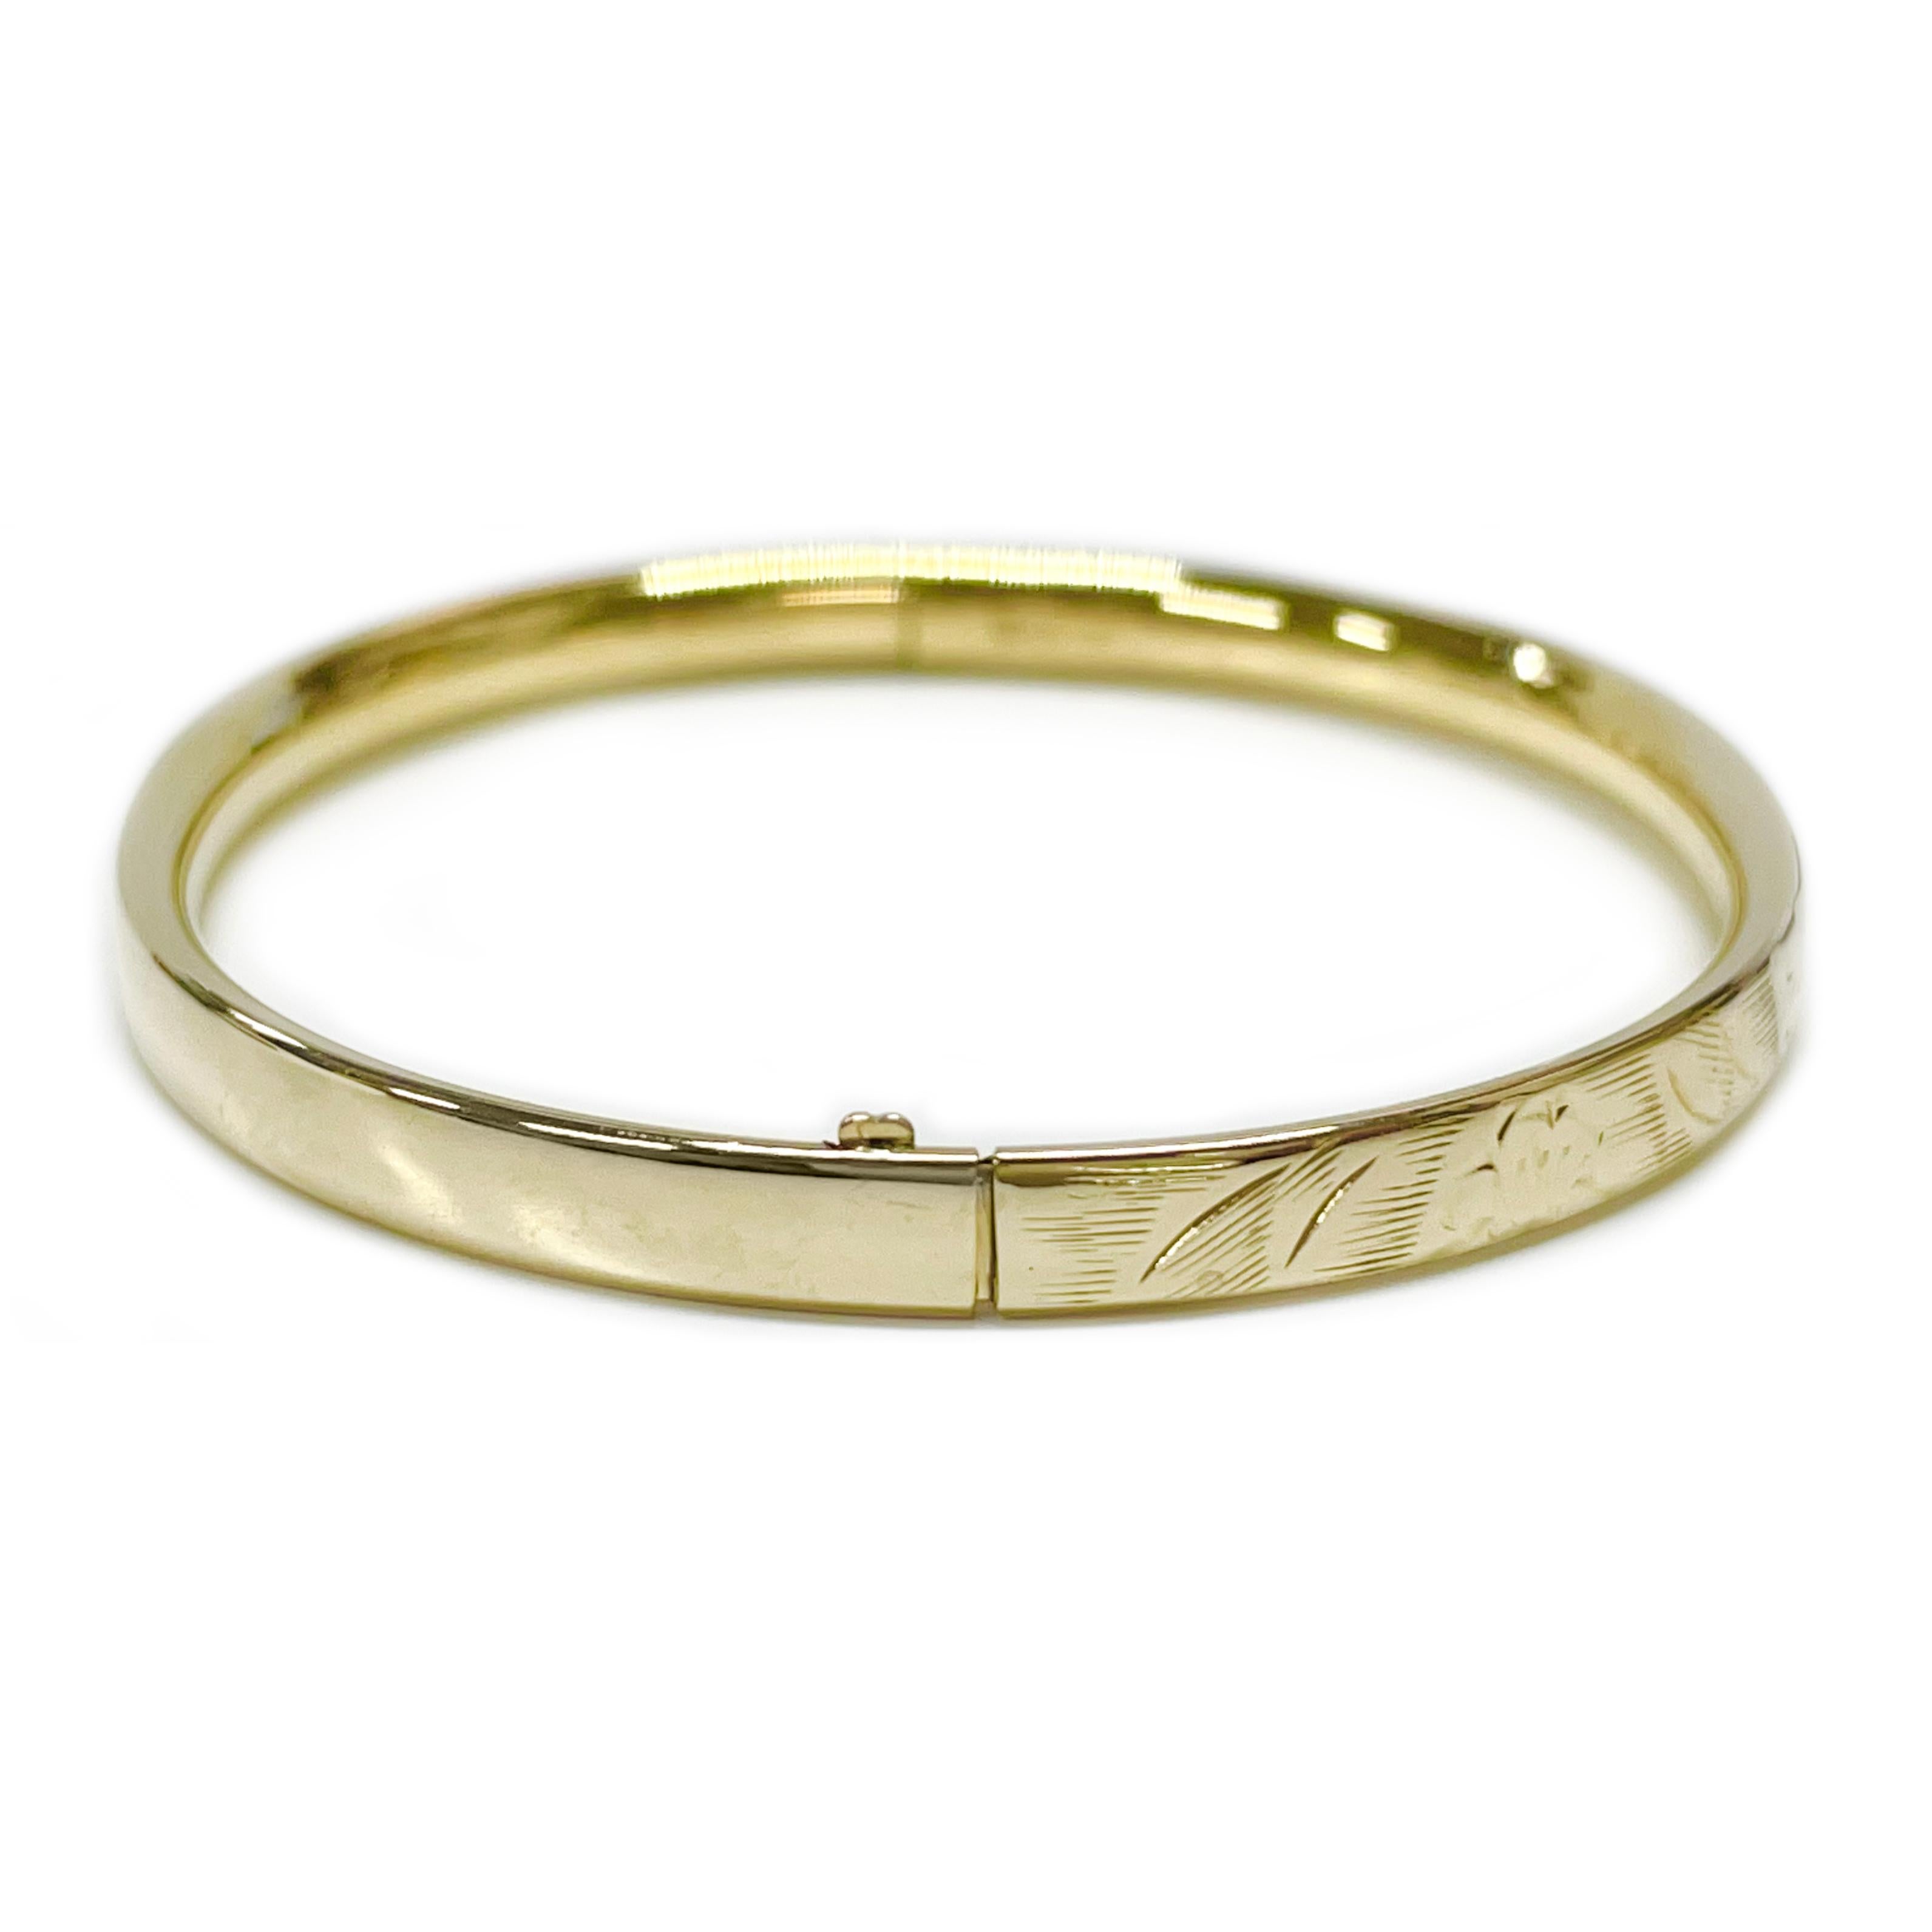 14 Karat Yellow Gold Engraved Baby Bangle Bracelet. The bracelet has an overall smooth shiny finish with engraved floral accents. When the hinged bangle bracelet is stamped 14K BAB on the inside of the bangle. The bracelet is 3.8mm wide. The